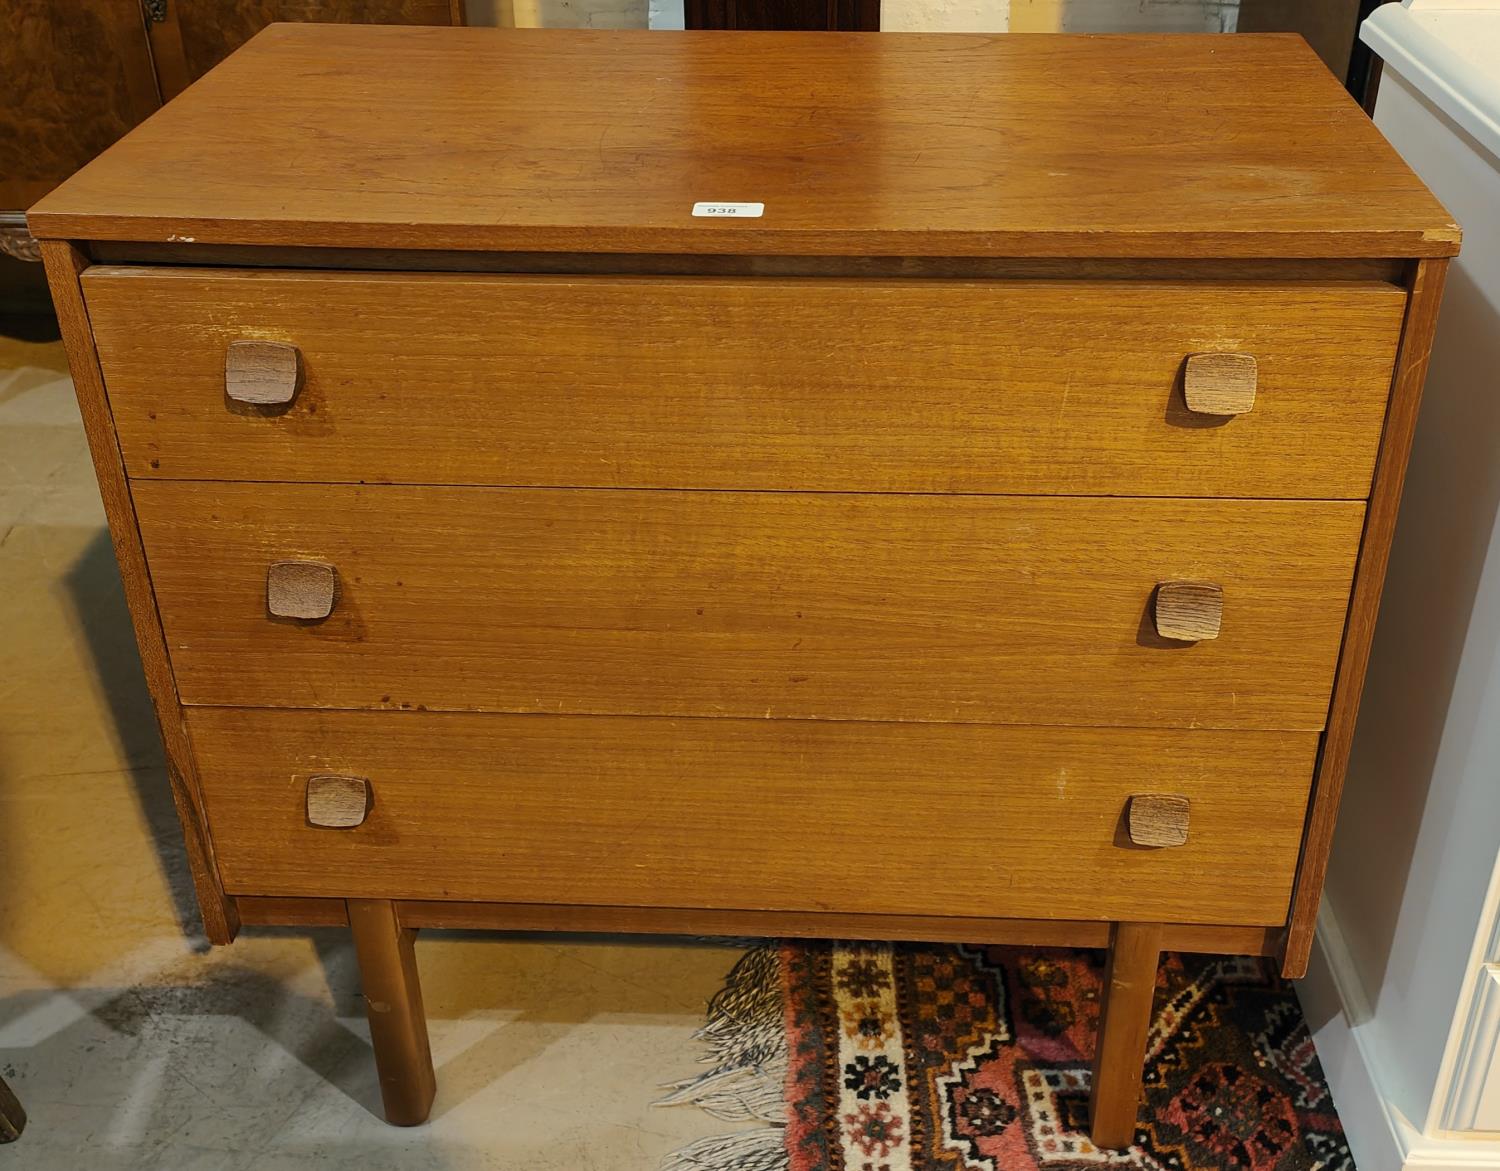 A 1970's G-Plan style teak 3 height chest of drawers and wall mirror